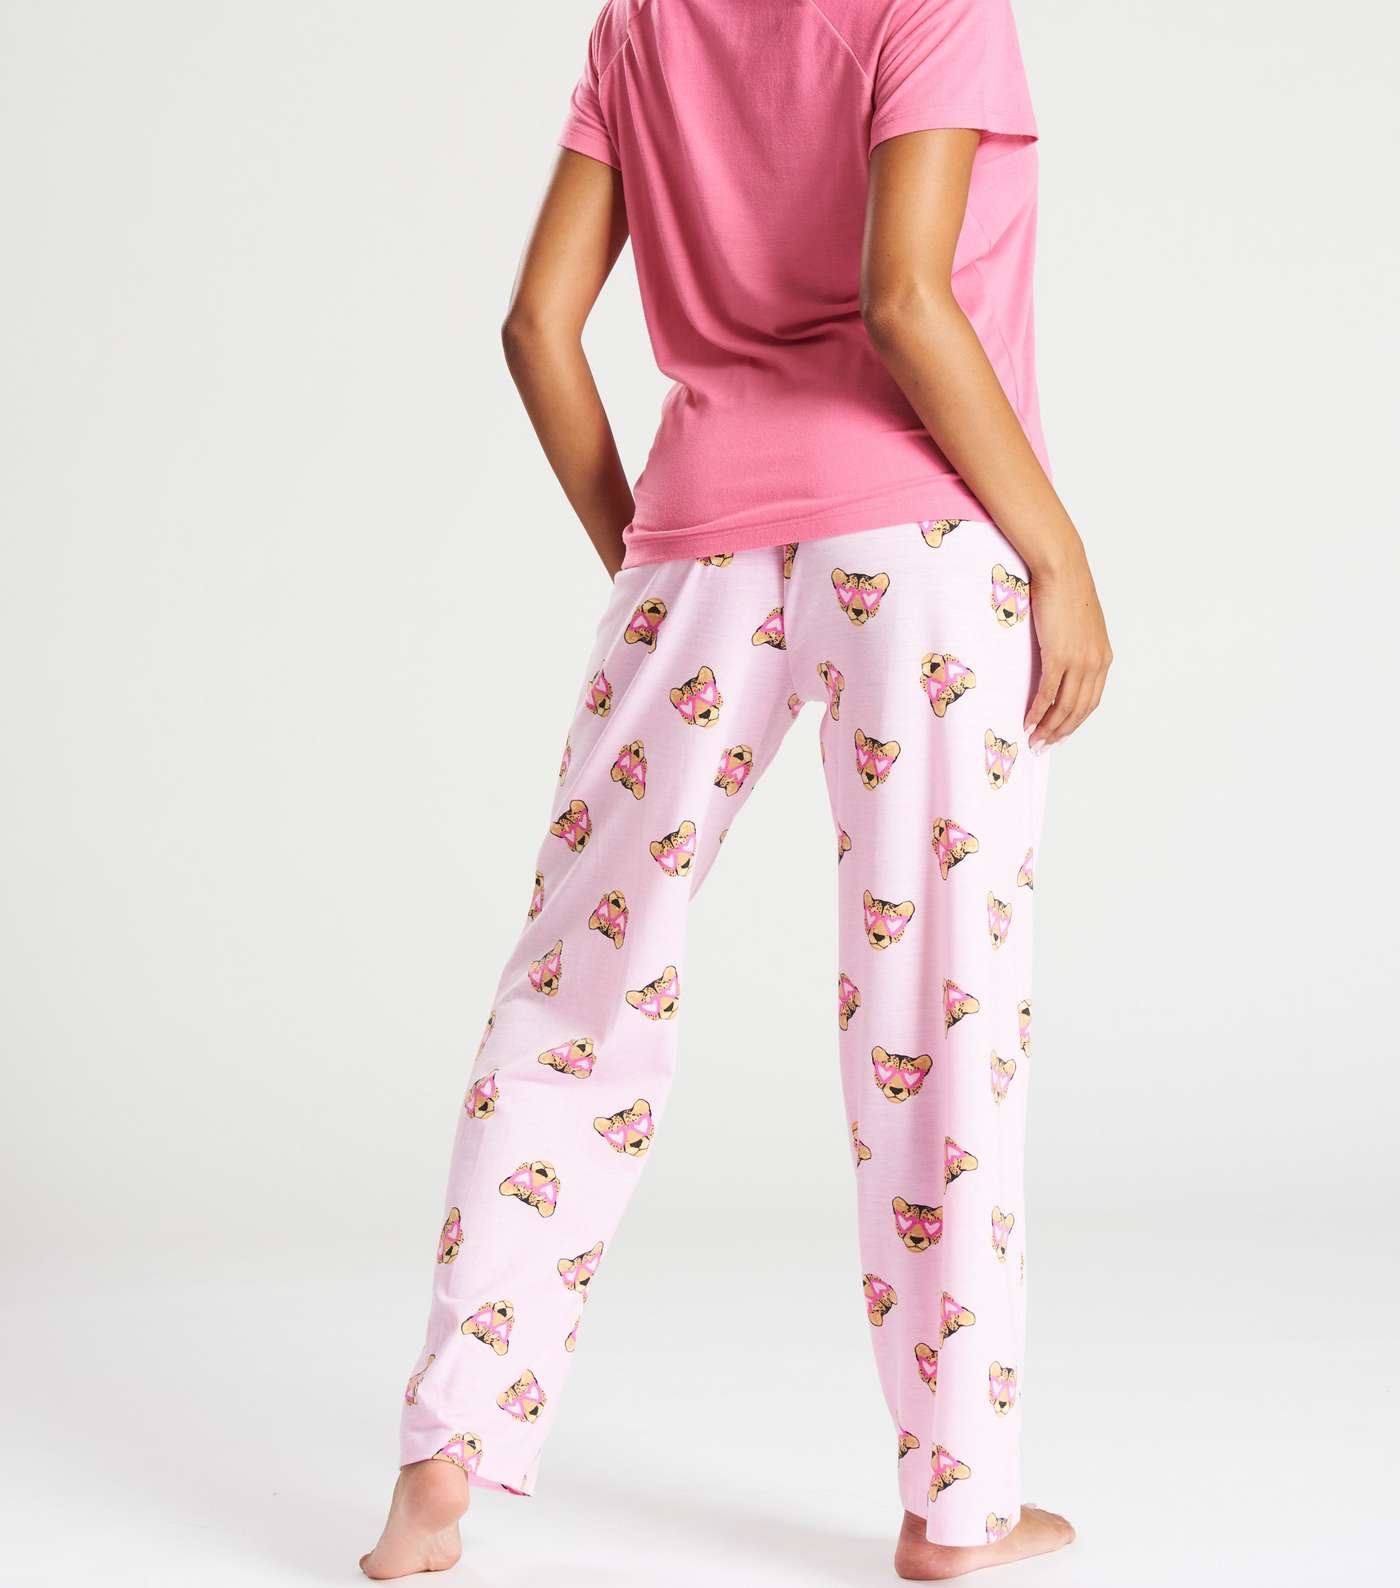 Loungeable Pink Trouser Pyjama Set with Leopard Print Image 5